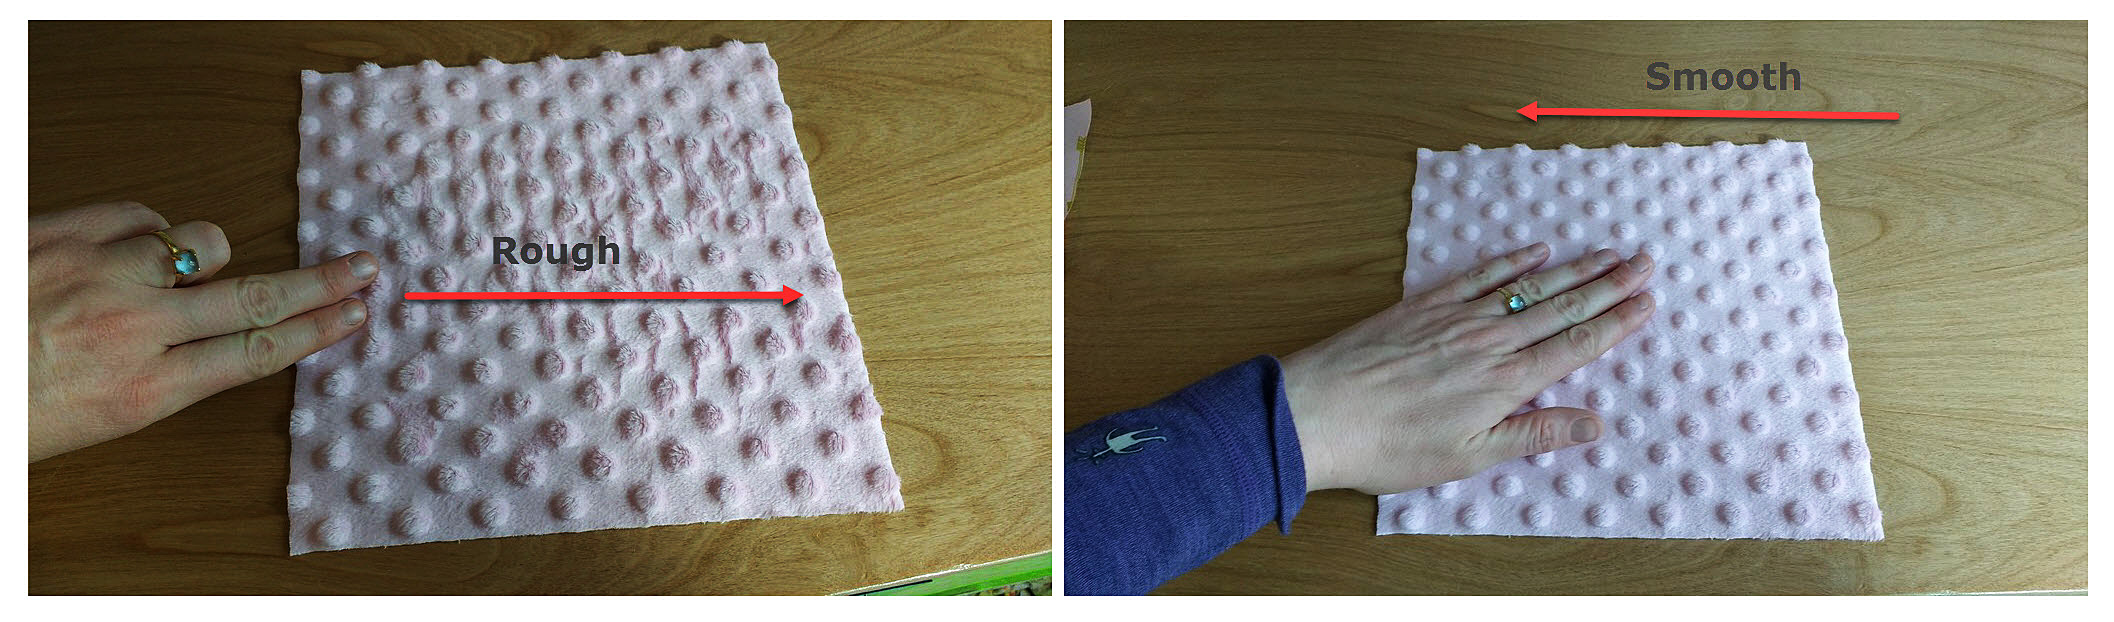 Sewing with Plush Fabric - Sew4Home